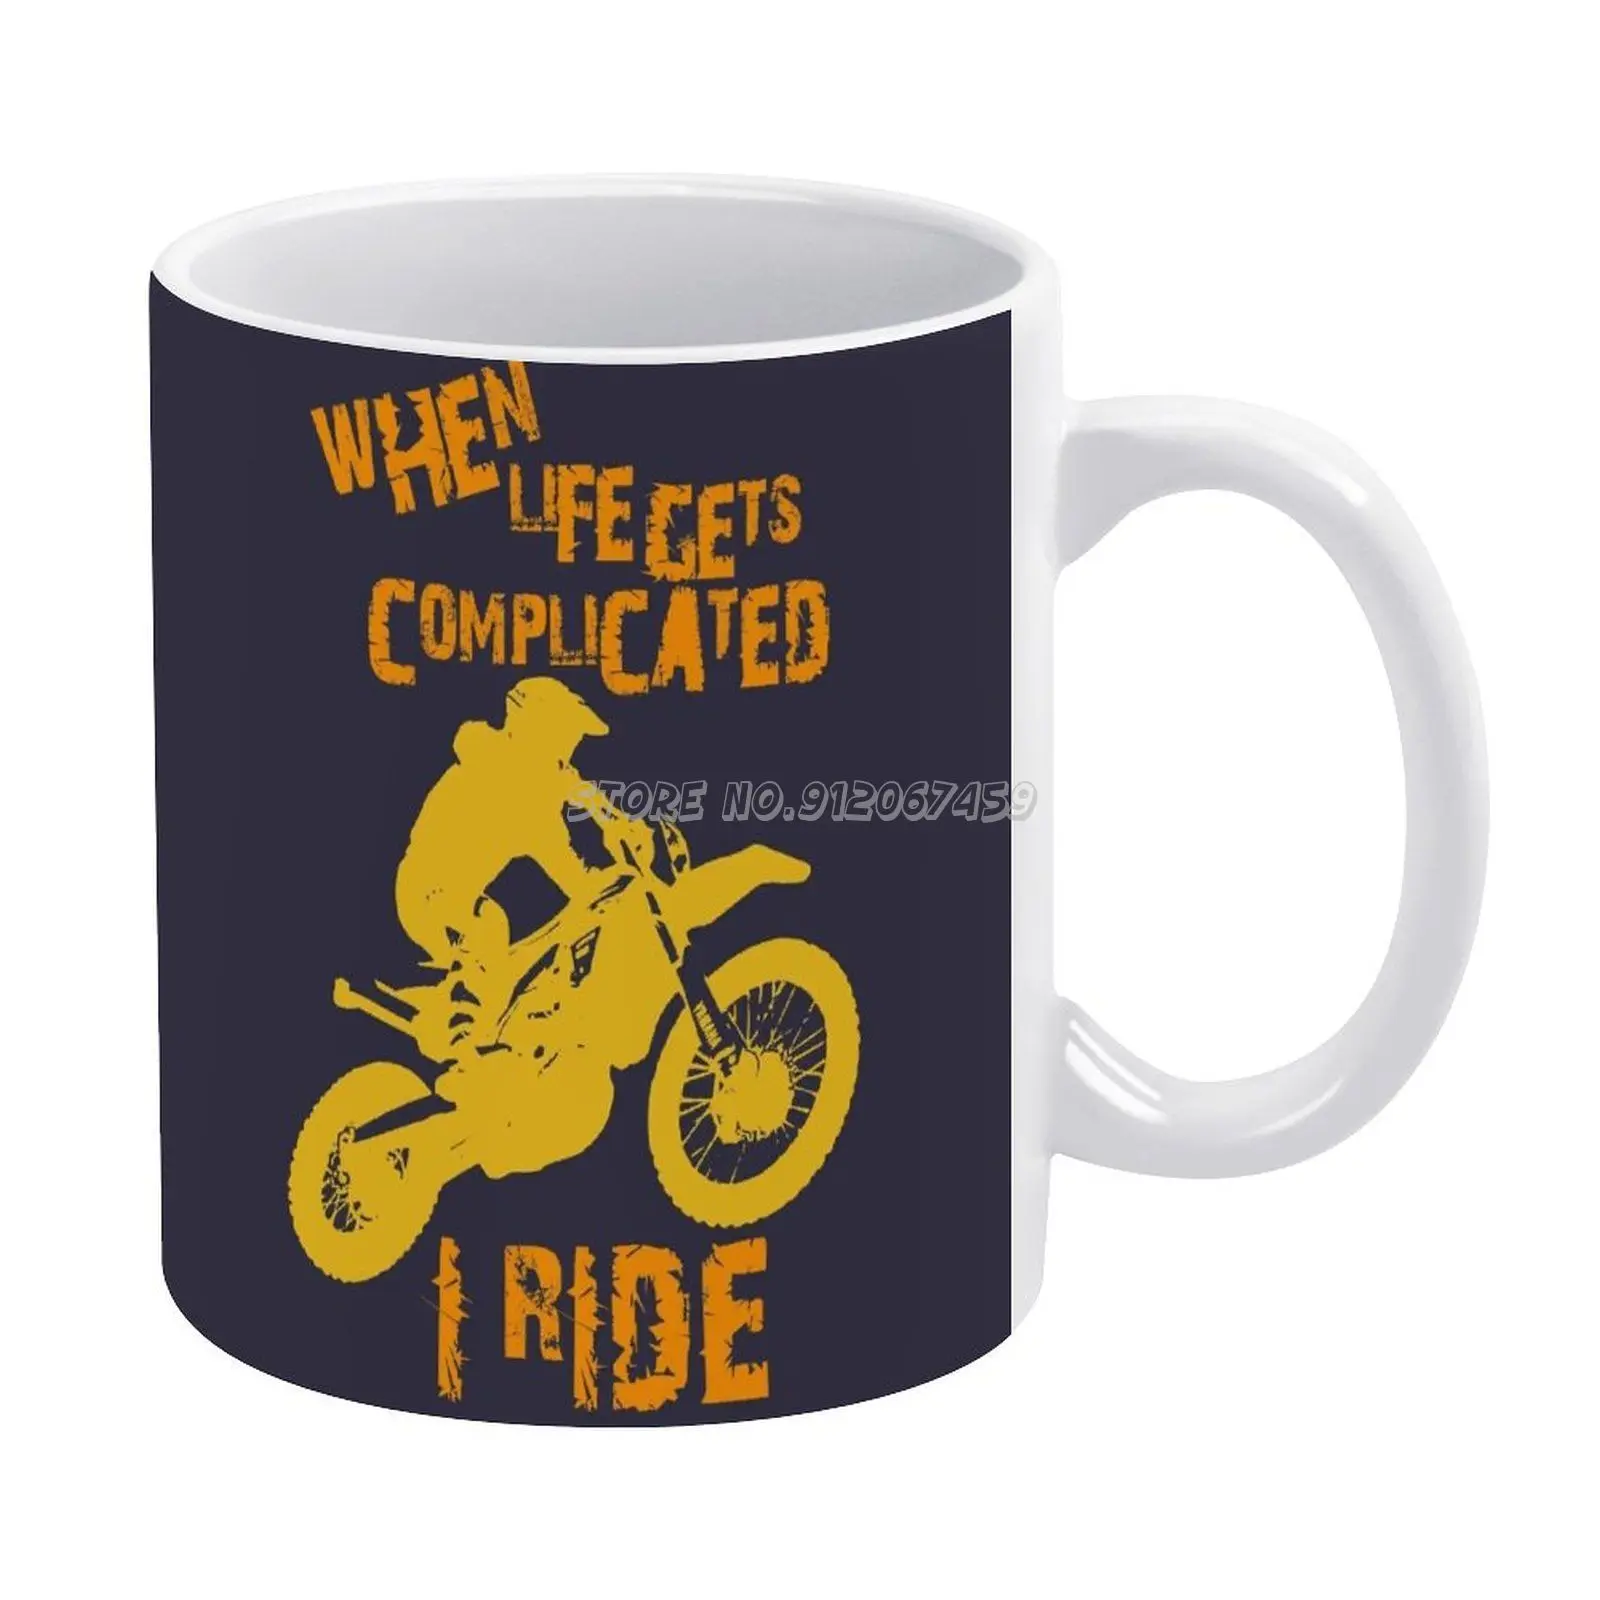 

Motorcycle Passionate Shirts Coffee Mugs Soft Decorative Throw Pillow Cover for Home Pillows NOT Included Motors Life Motorcycle